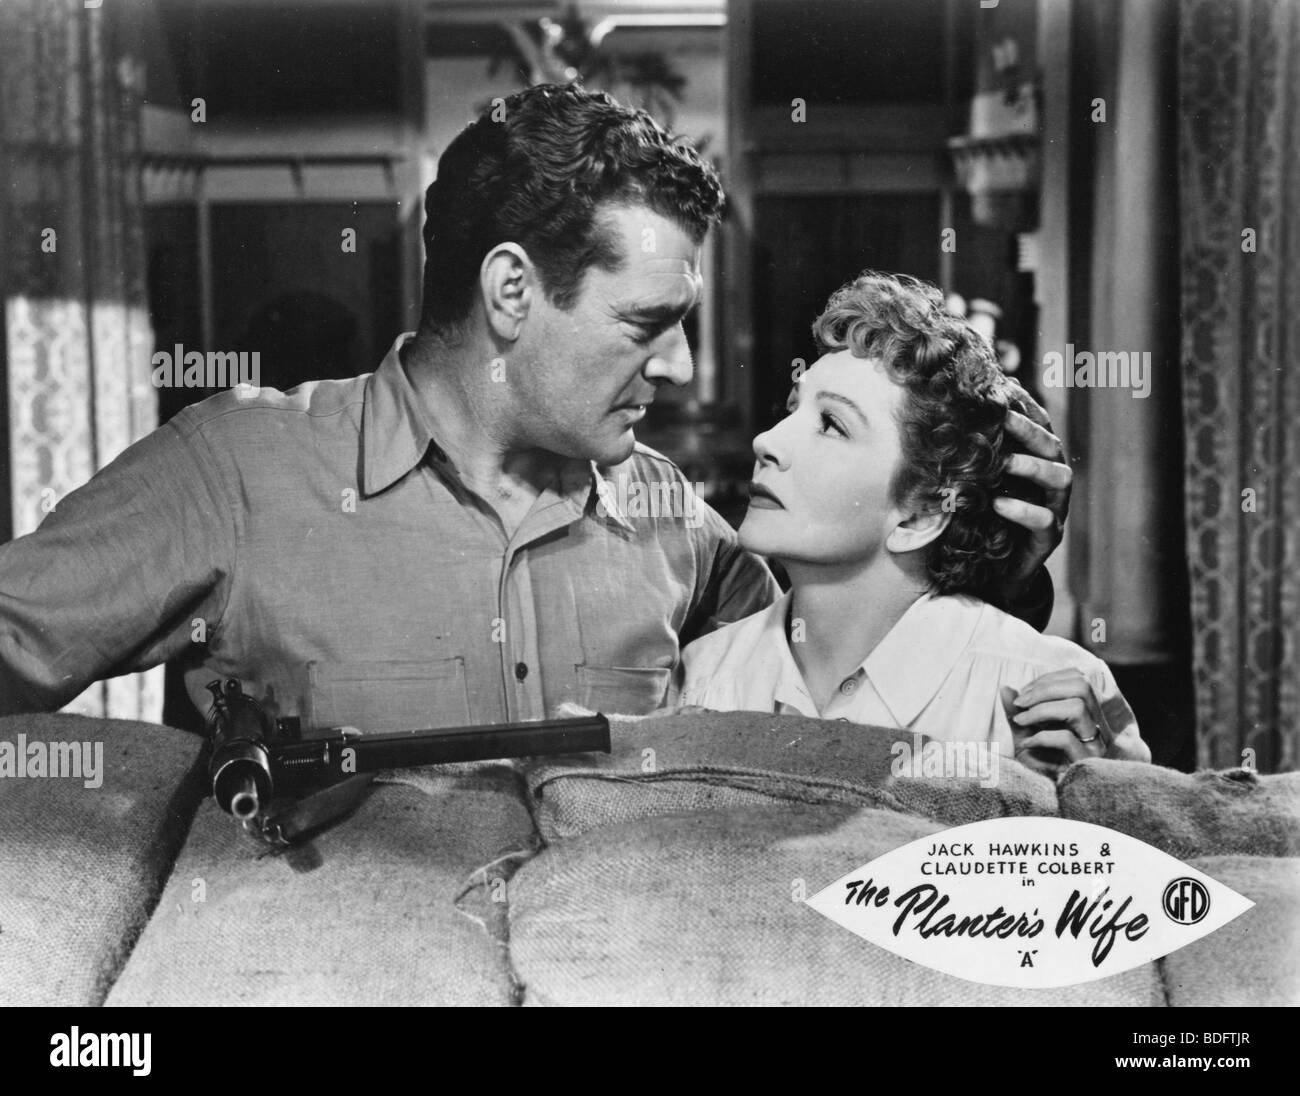 THE PLANTER'S WIFE  - 1952 Rank film with Jack Hawkins and Claudette Colbert Stock Photo